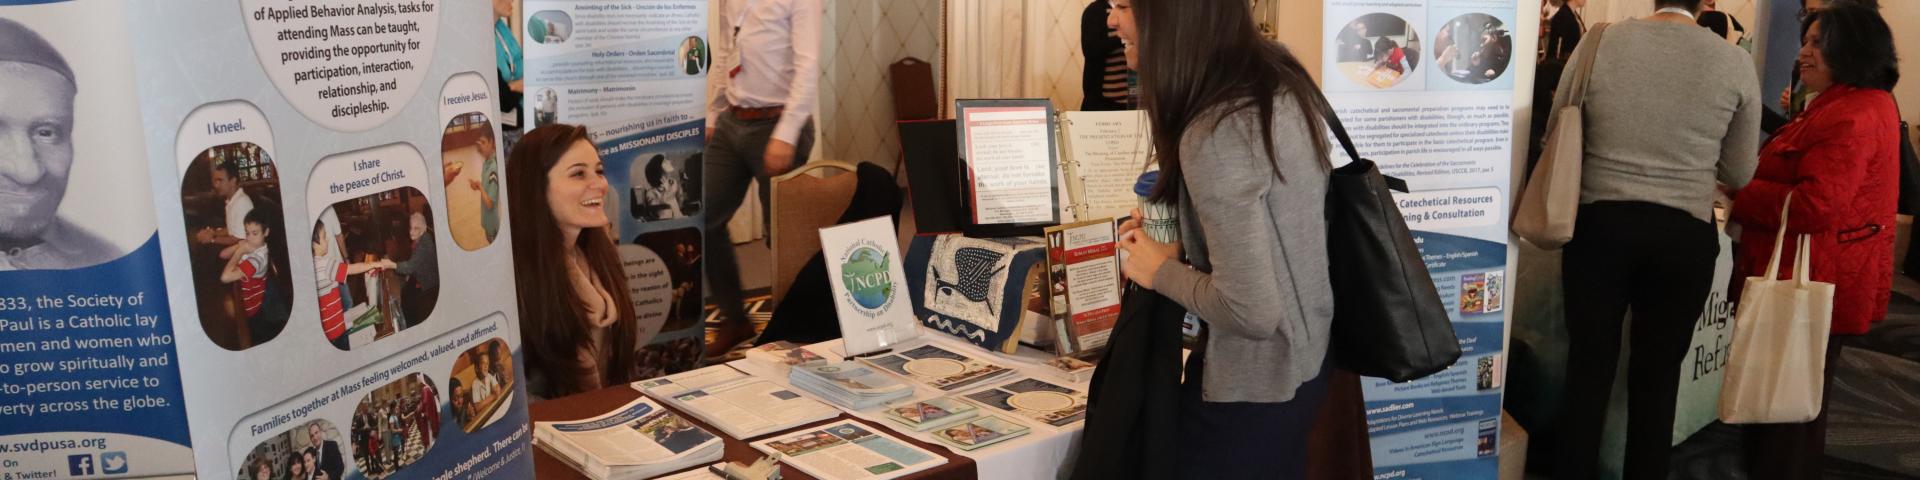 Staff networking and educating at NCPD exhibit table 